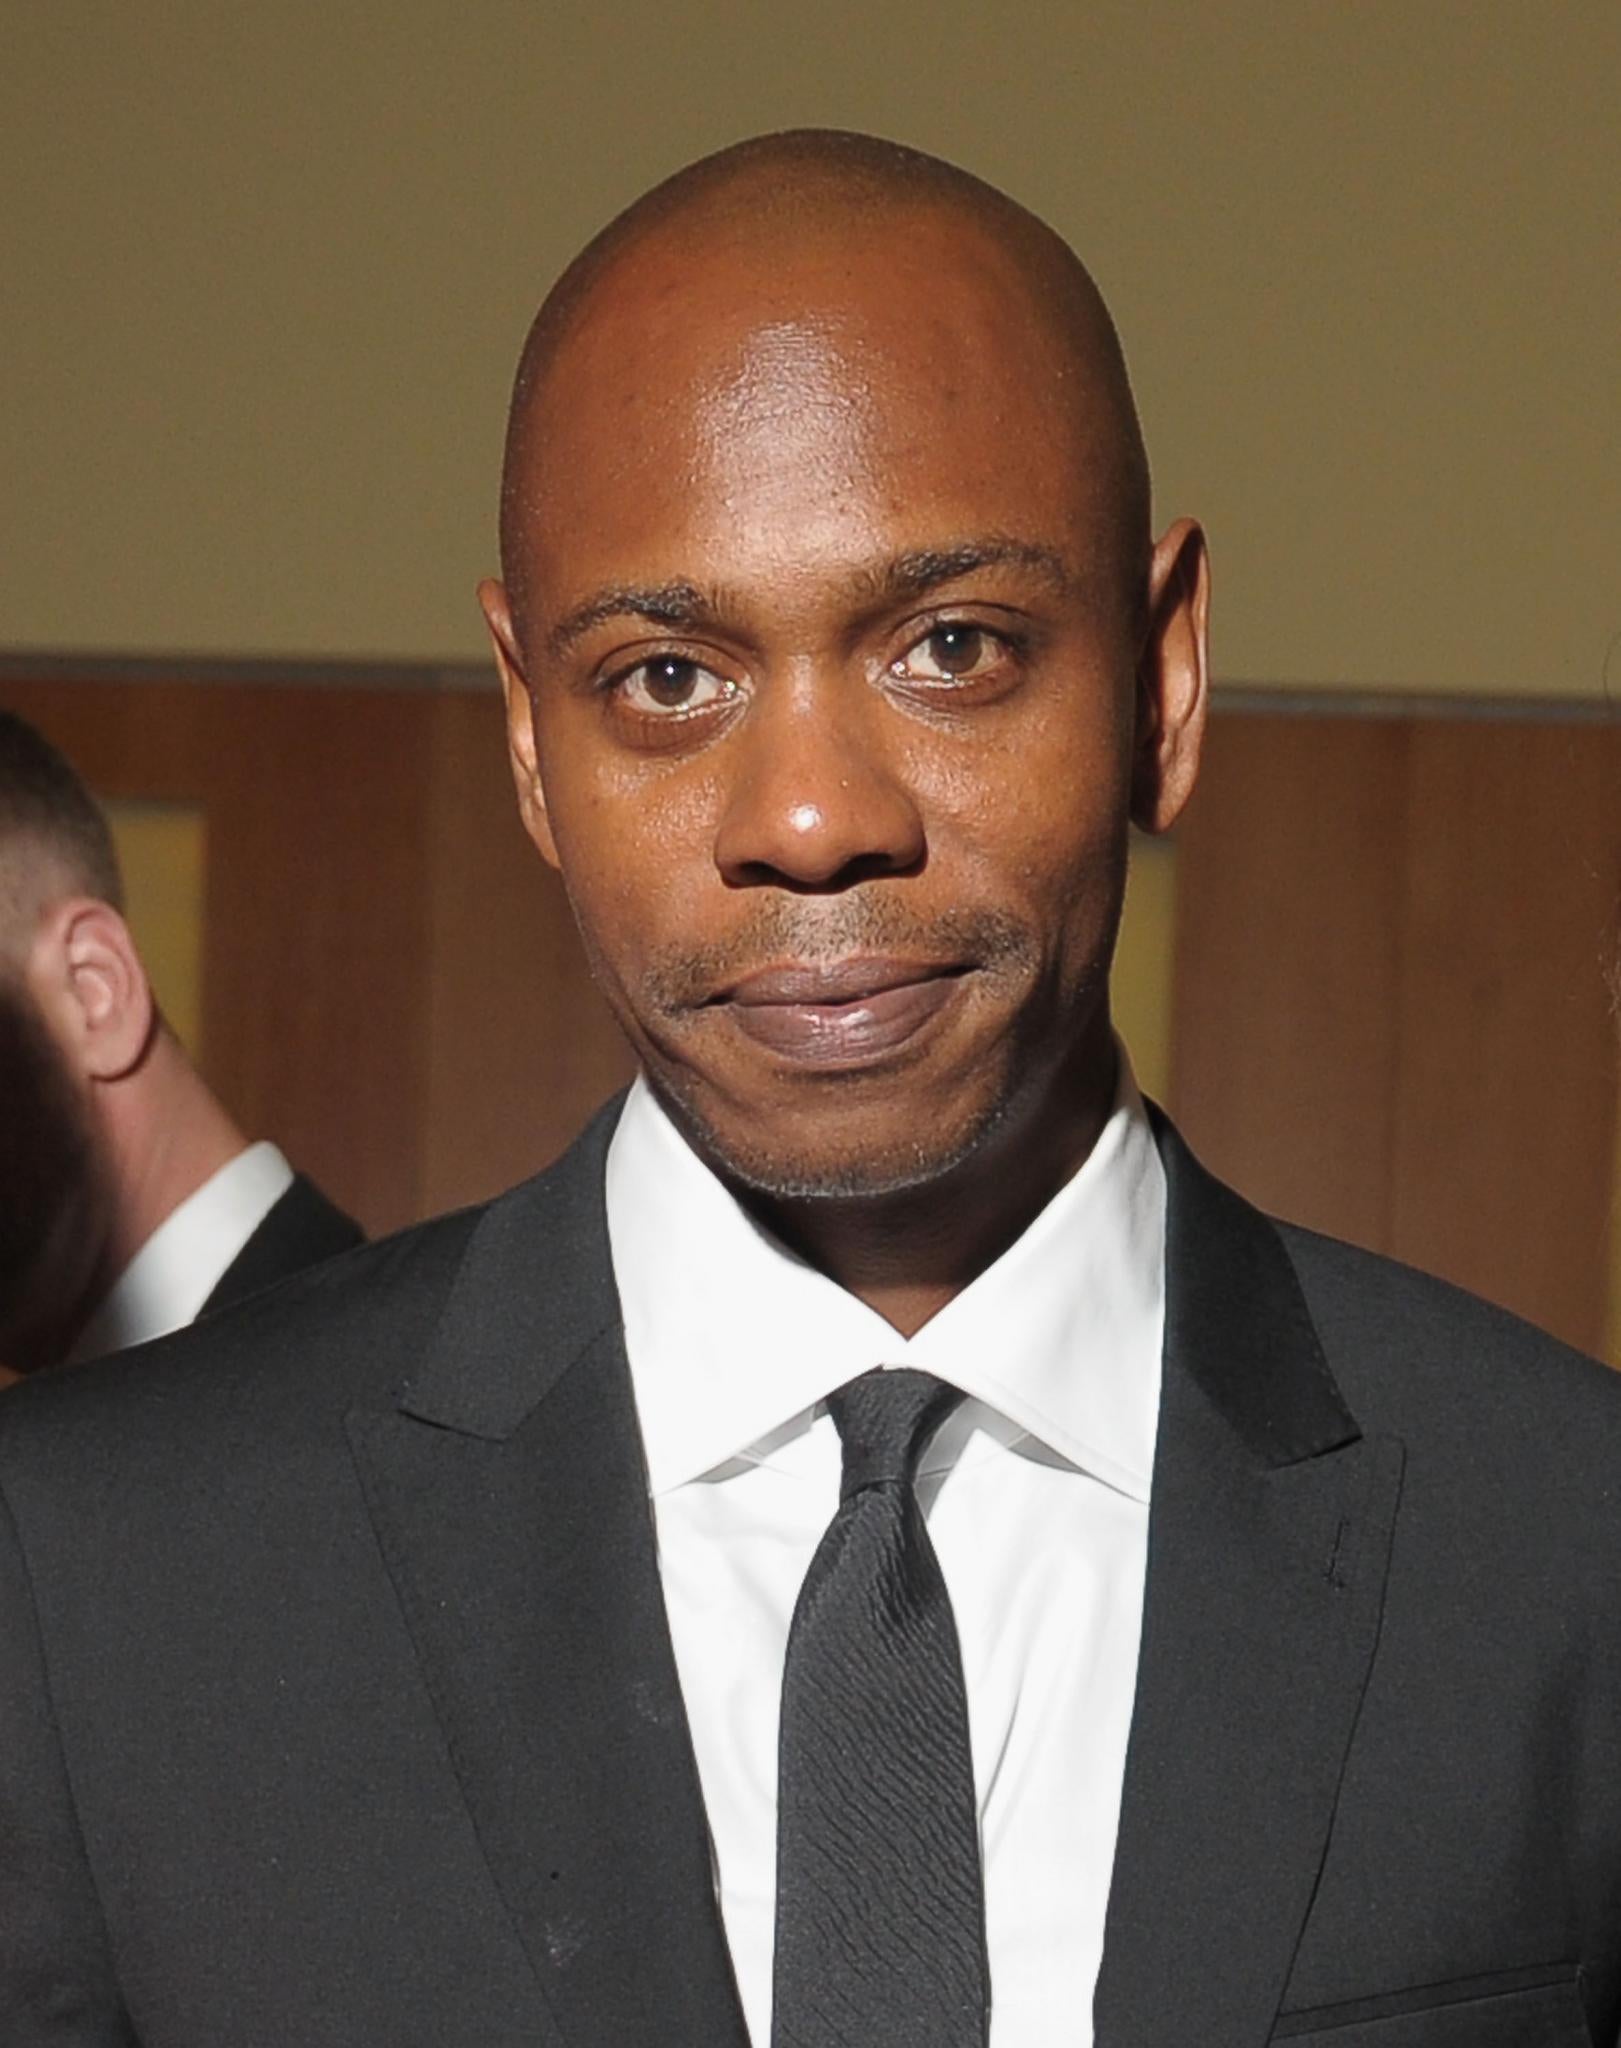 Coffee Talk: Dave Chappelle Heckled, Walks Off Stage